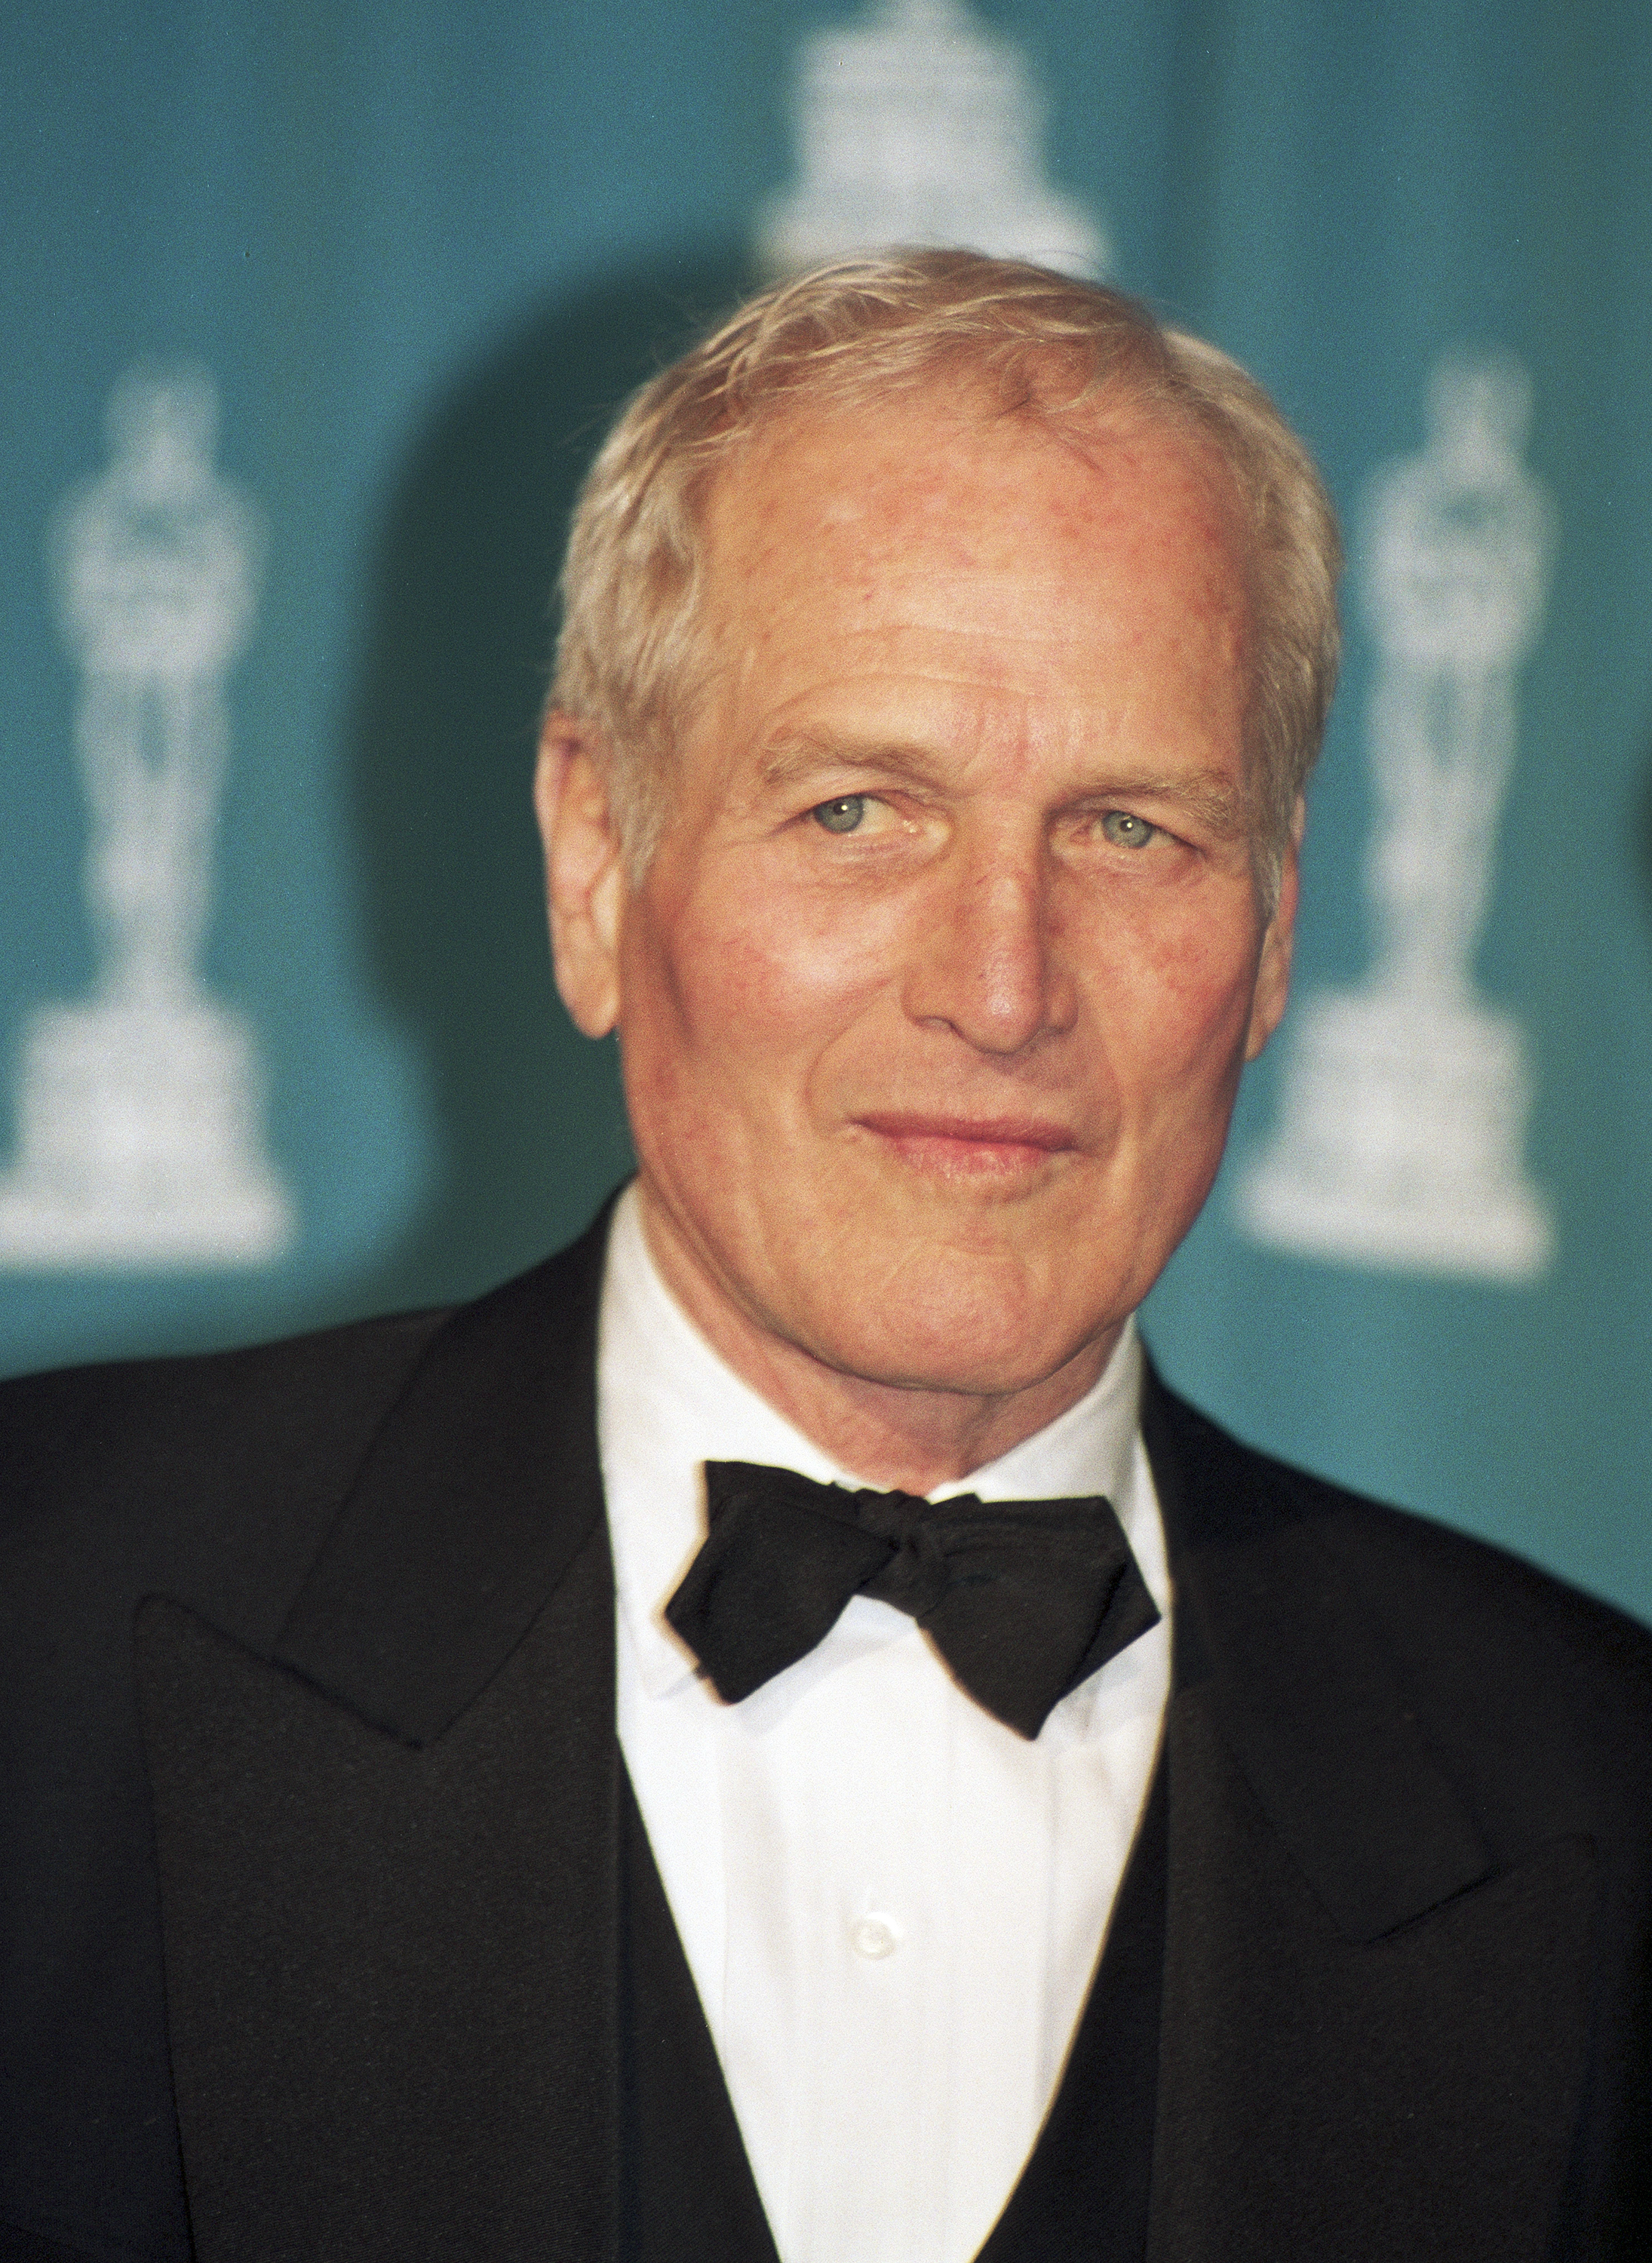 Paul Newman in a classic tuxedo at a formal event